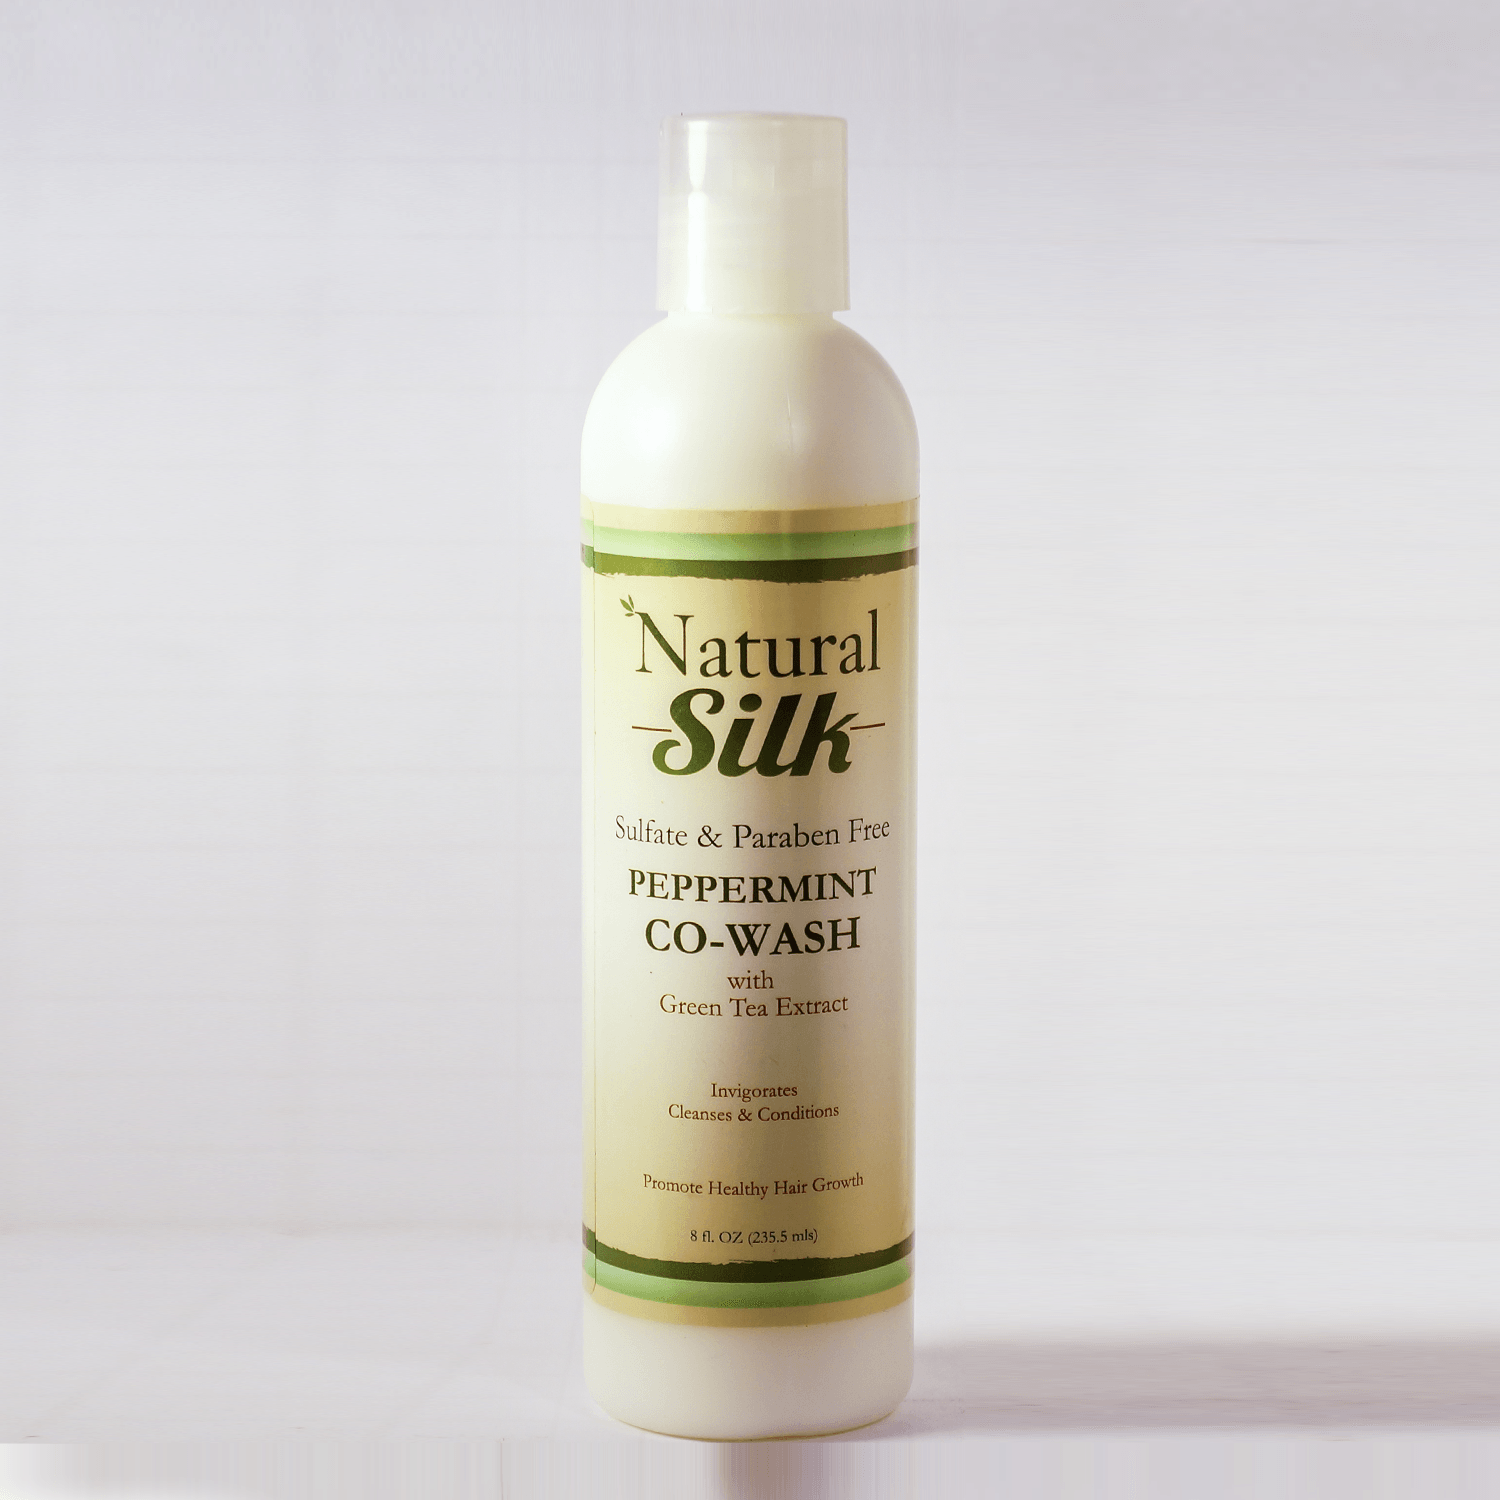 Natural Silk Peppermint Co-Wash